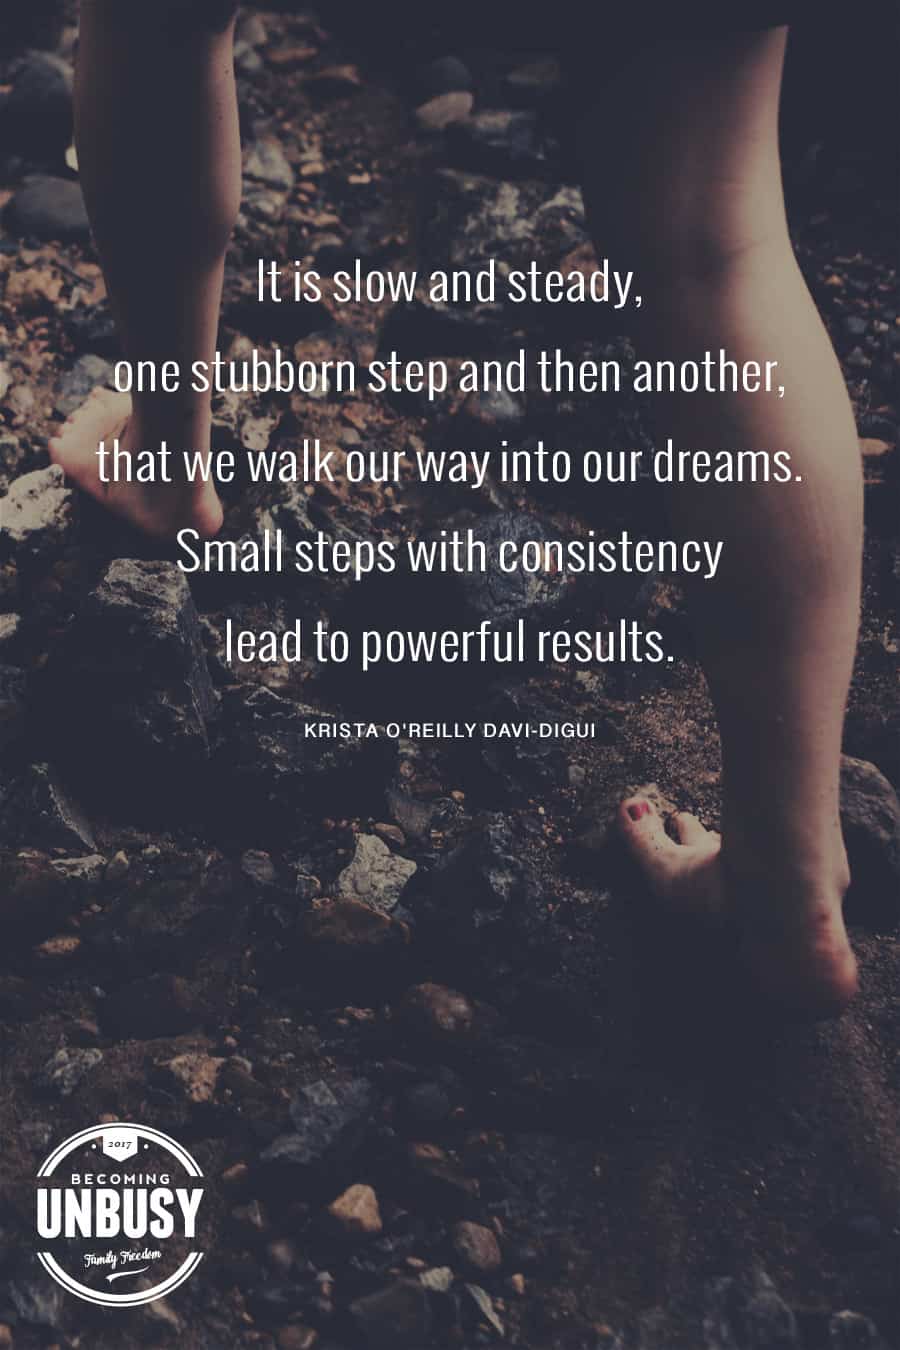 It is slow and steady, one stubborn step and then another, that we walk our way into our dreams. Small steps with consistency lead to powerful results. - Krista O'Reilly Davi-Digui #quote #dreams #BecomingUnBusy *Love this quote and this article!